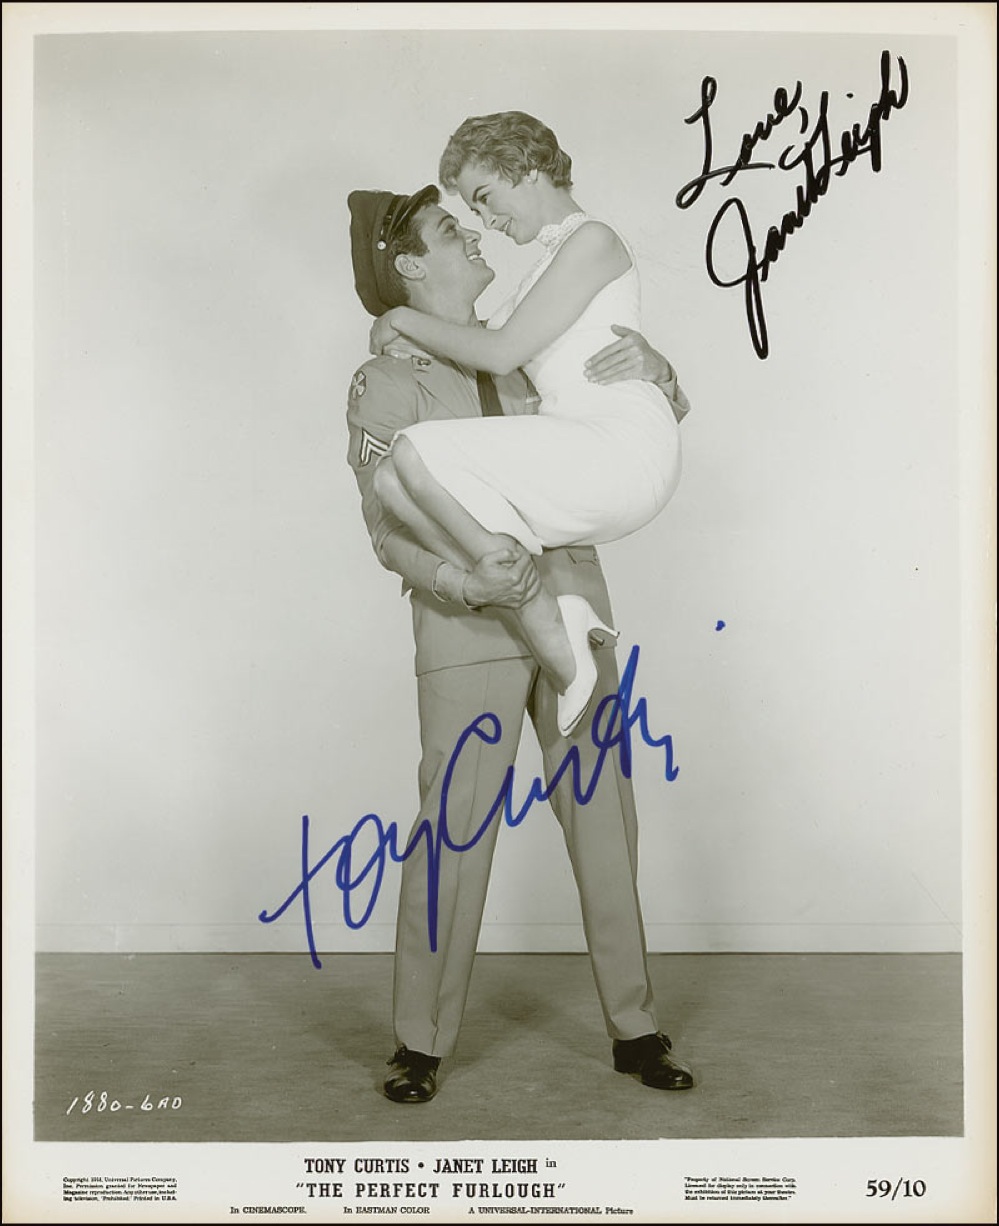 Lot #1158 Tony Curtis and Janet Leigh